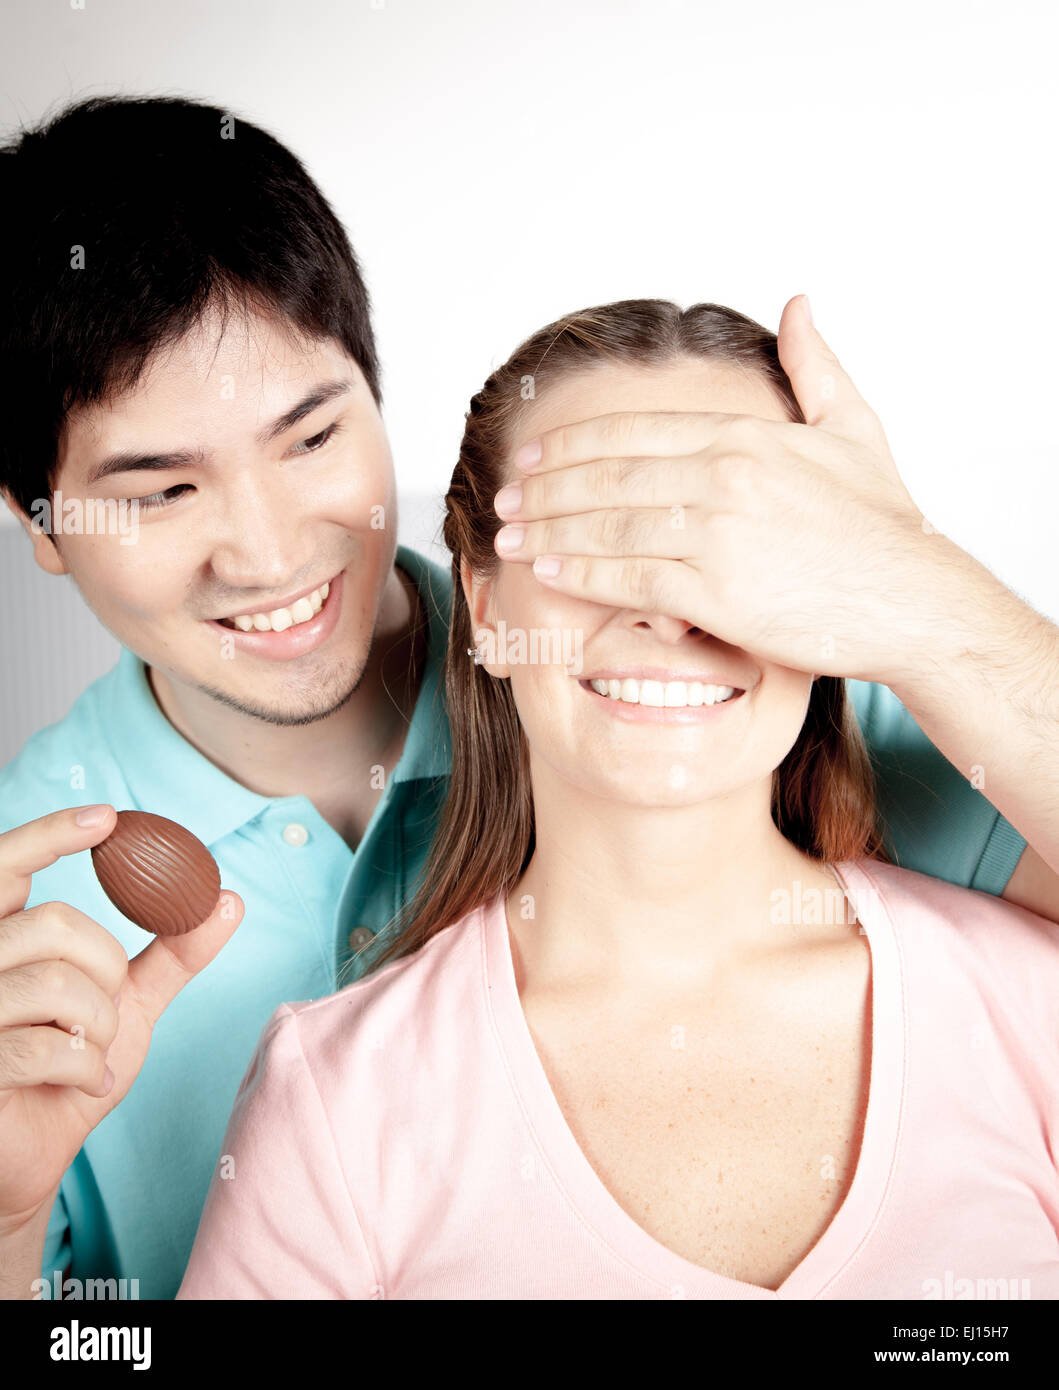 Man giving to a woman a surprice Stock Photo